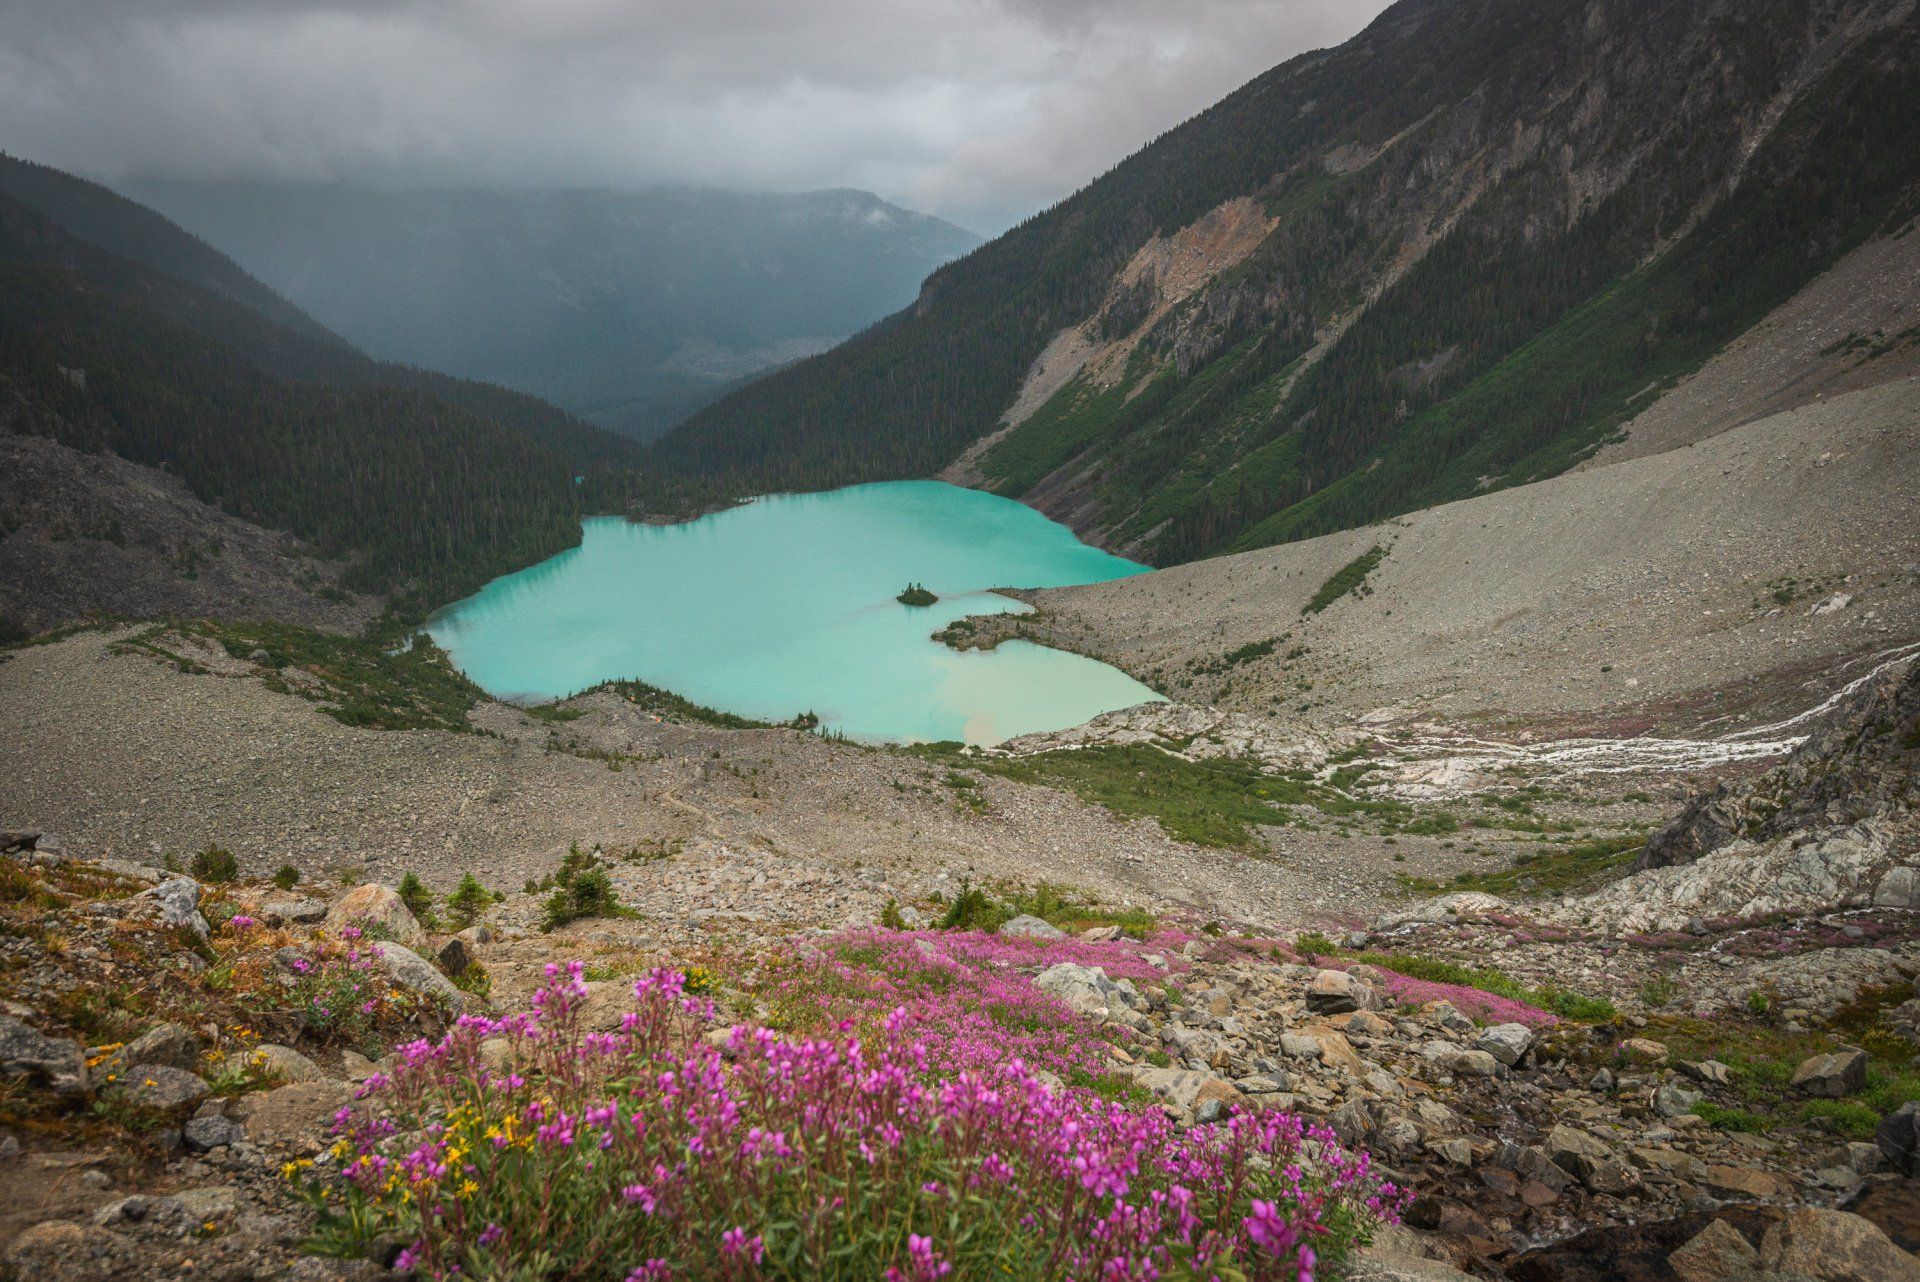 View of the upper Joffre lake from 300m elevation with alpine flower meadows in the front